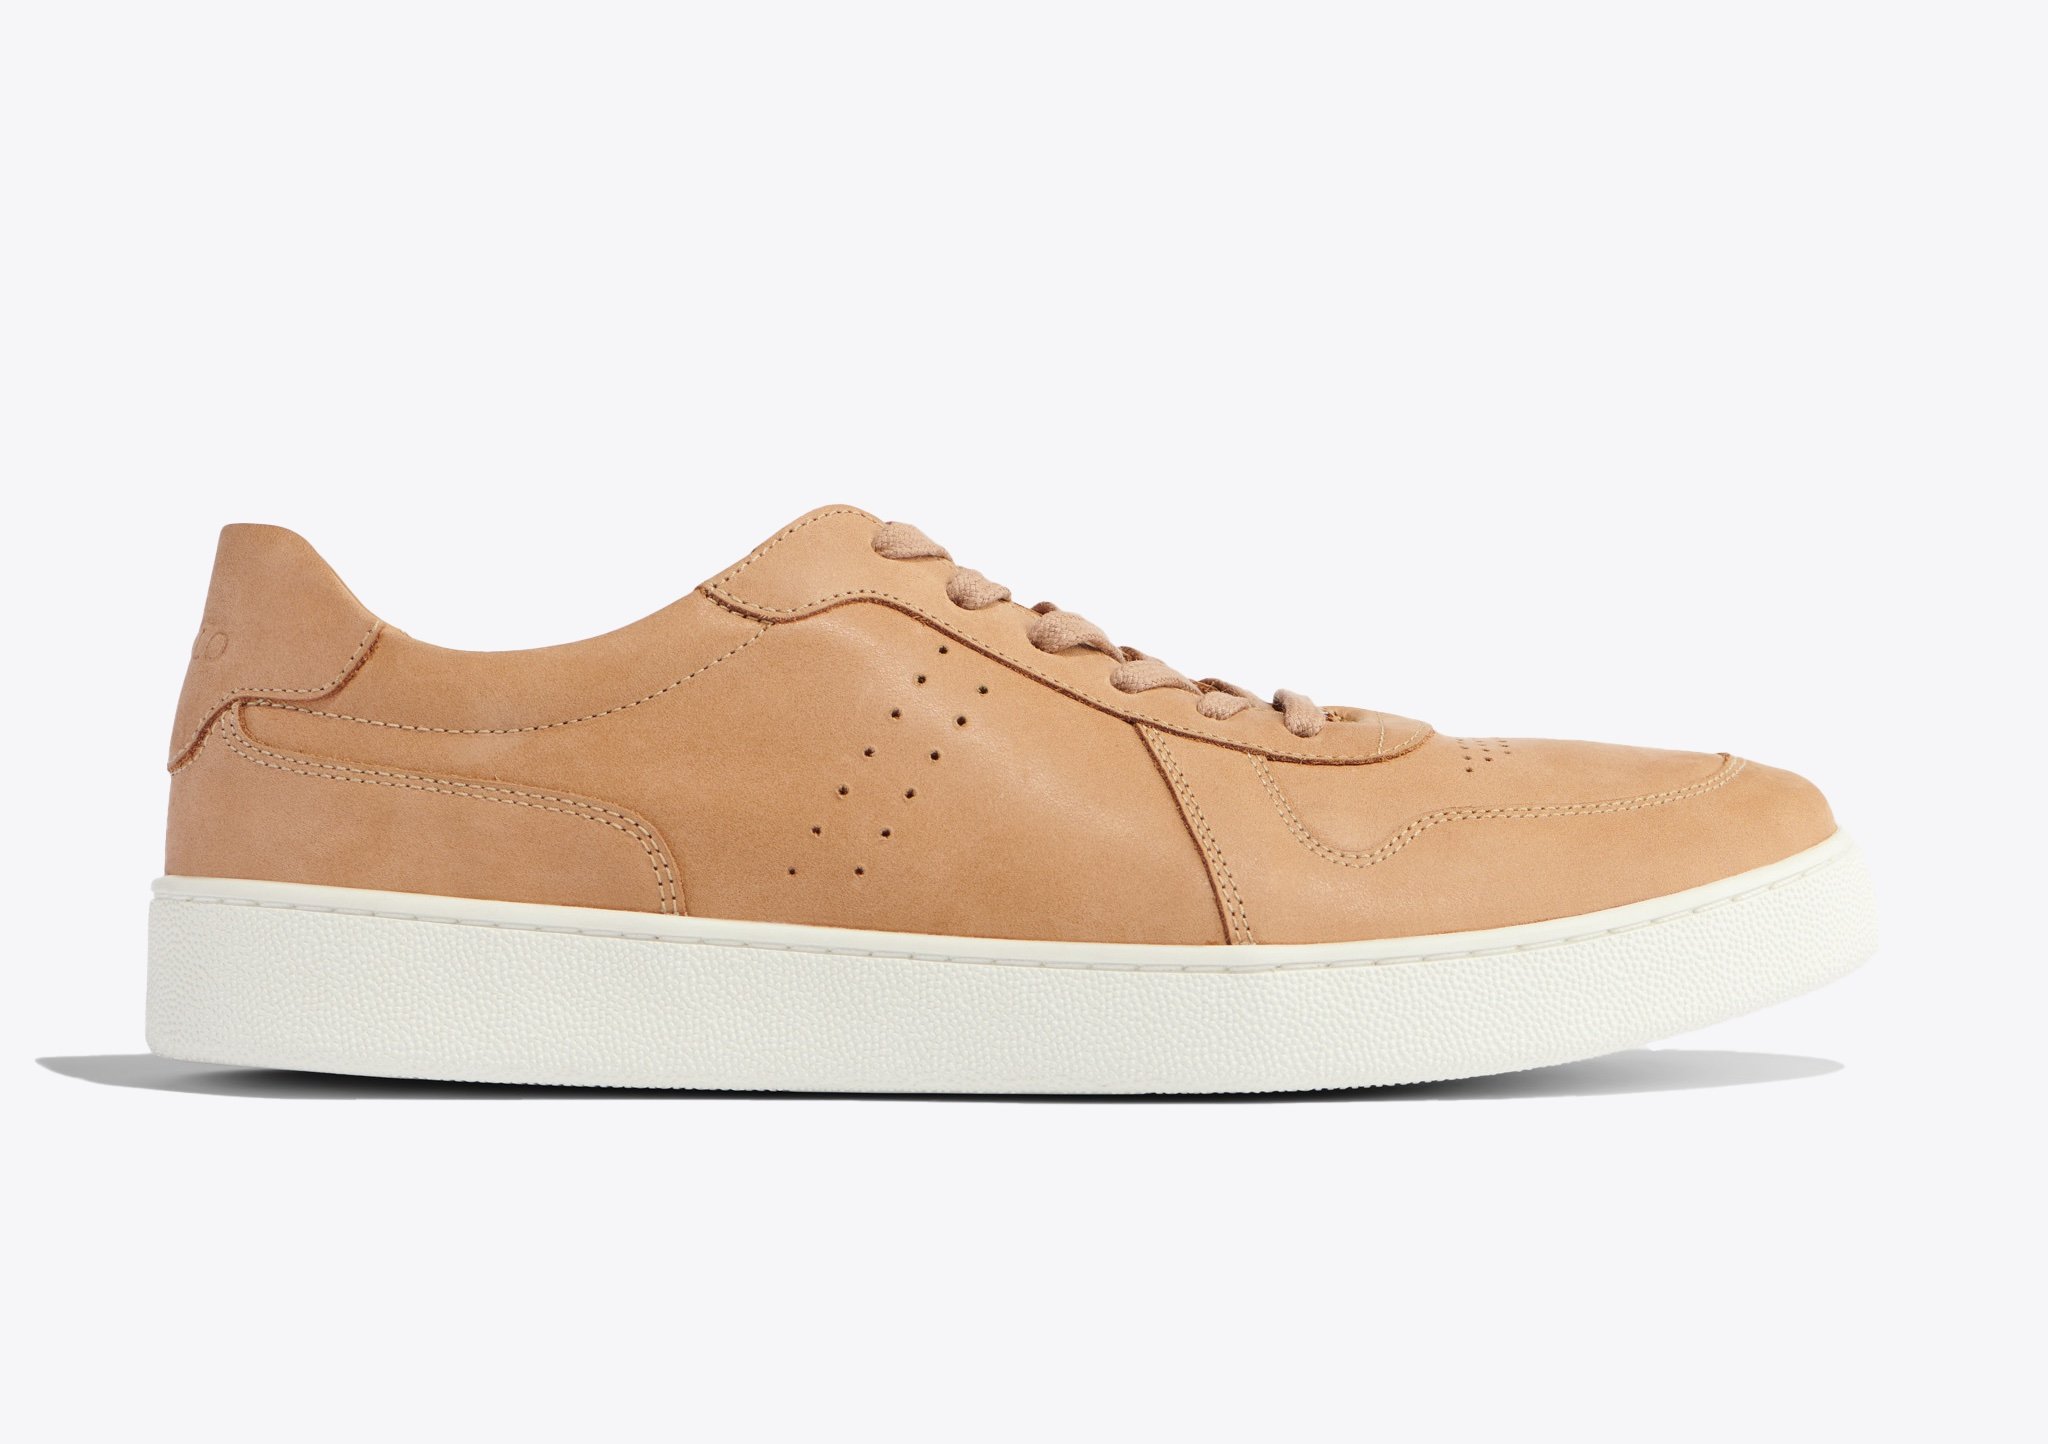 Nisolo Beto Go-To Court Sneaker Almond - Every Nisolo product is built on the foundation of comfort, function, and design. 